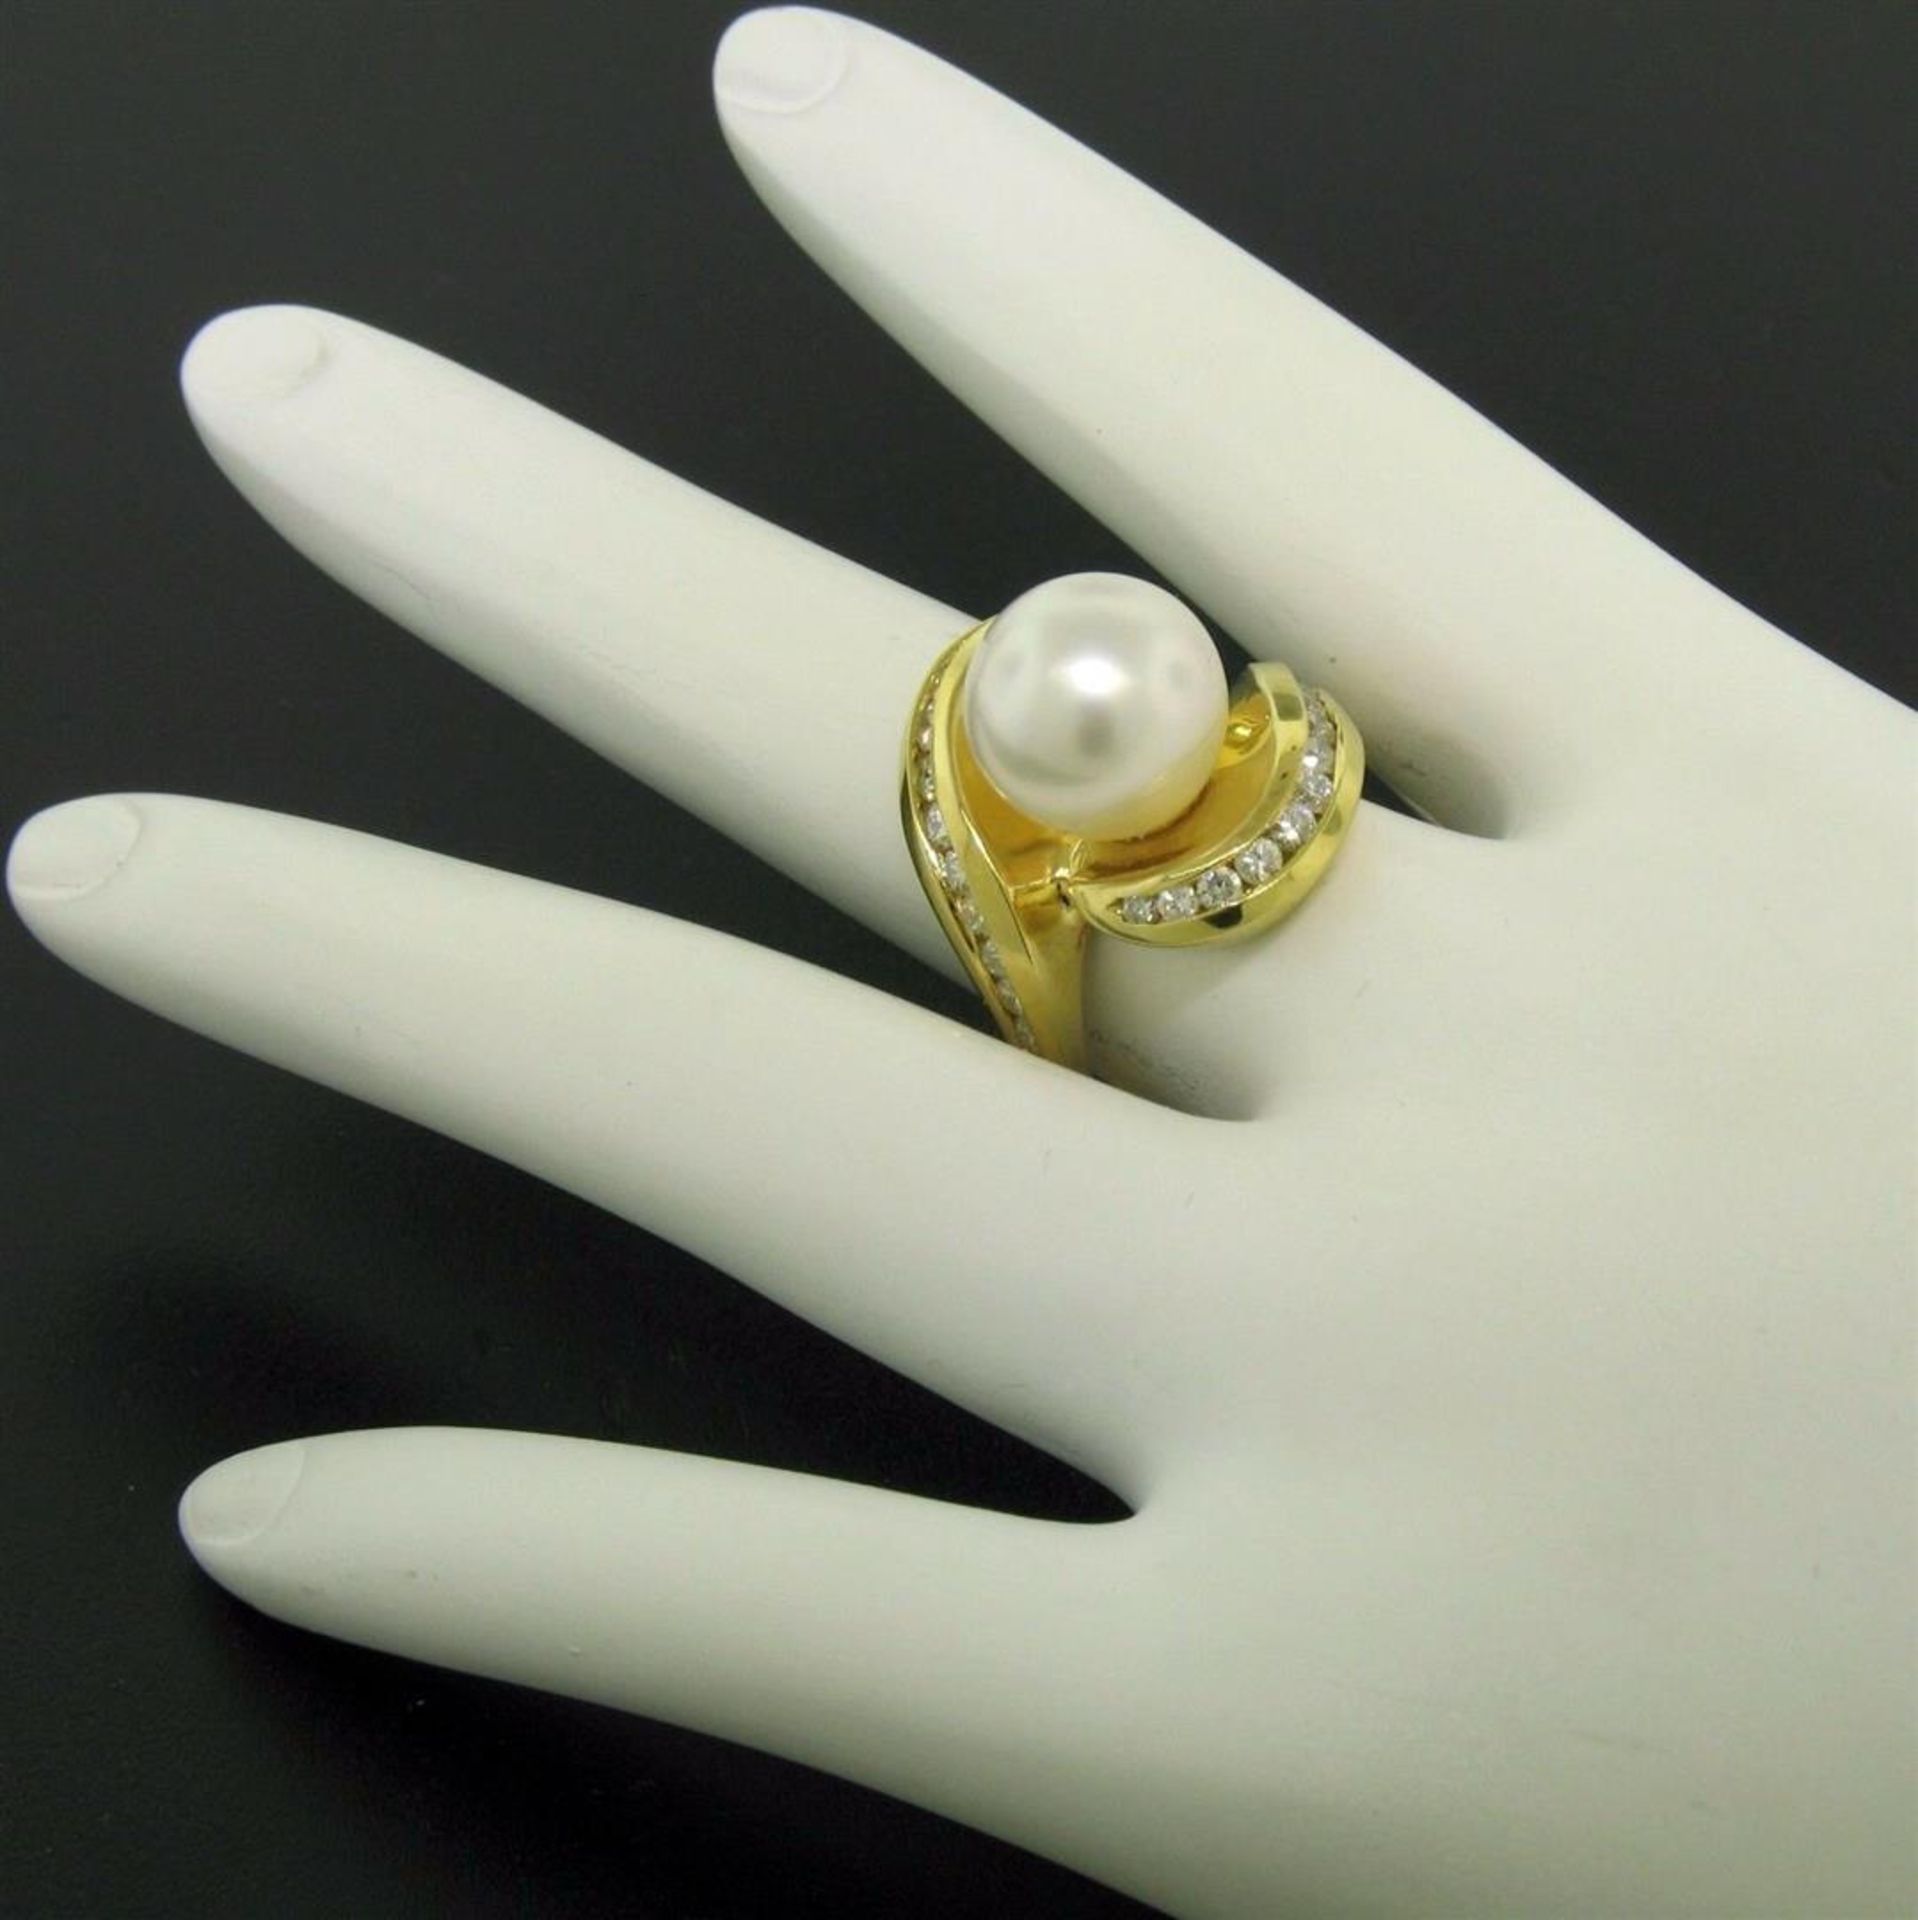 Large 18k Yellow Gold 10.6mm Round White Pearl Solitaire & Diamond Cocktail Ring - Image 7 of 8